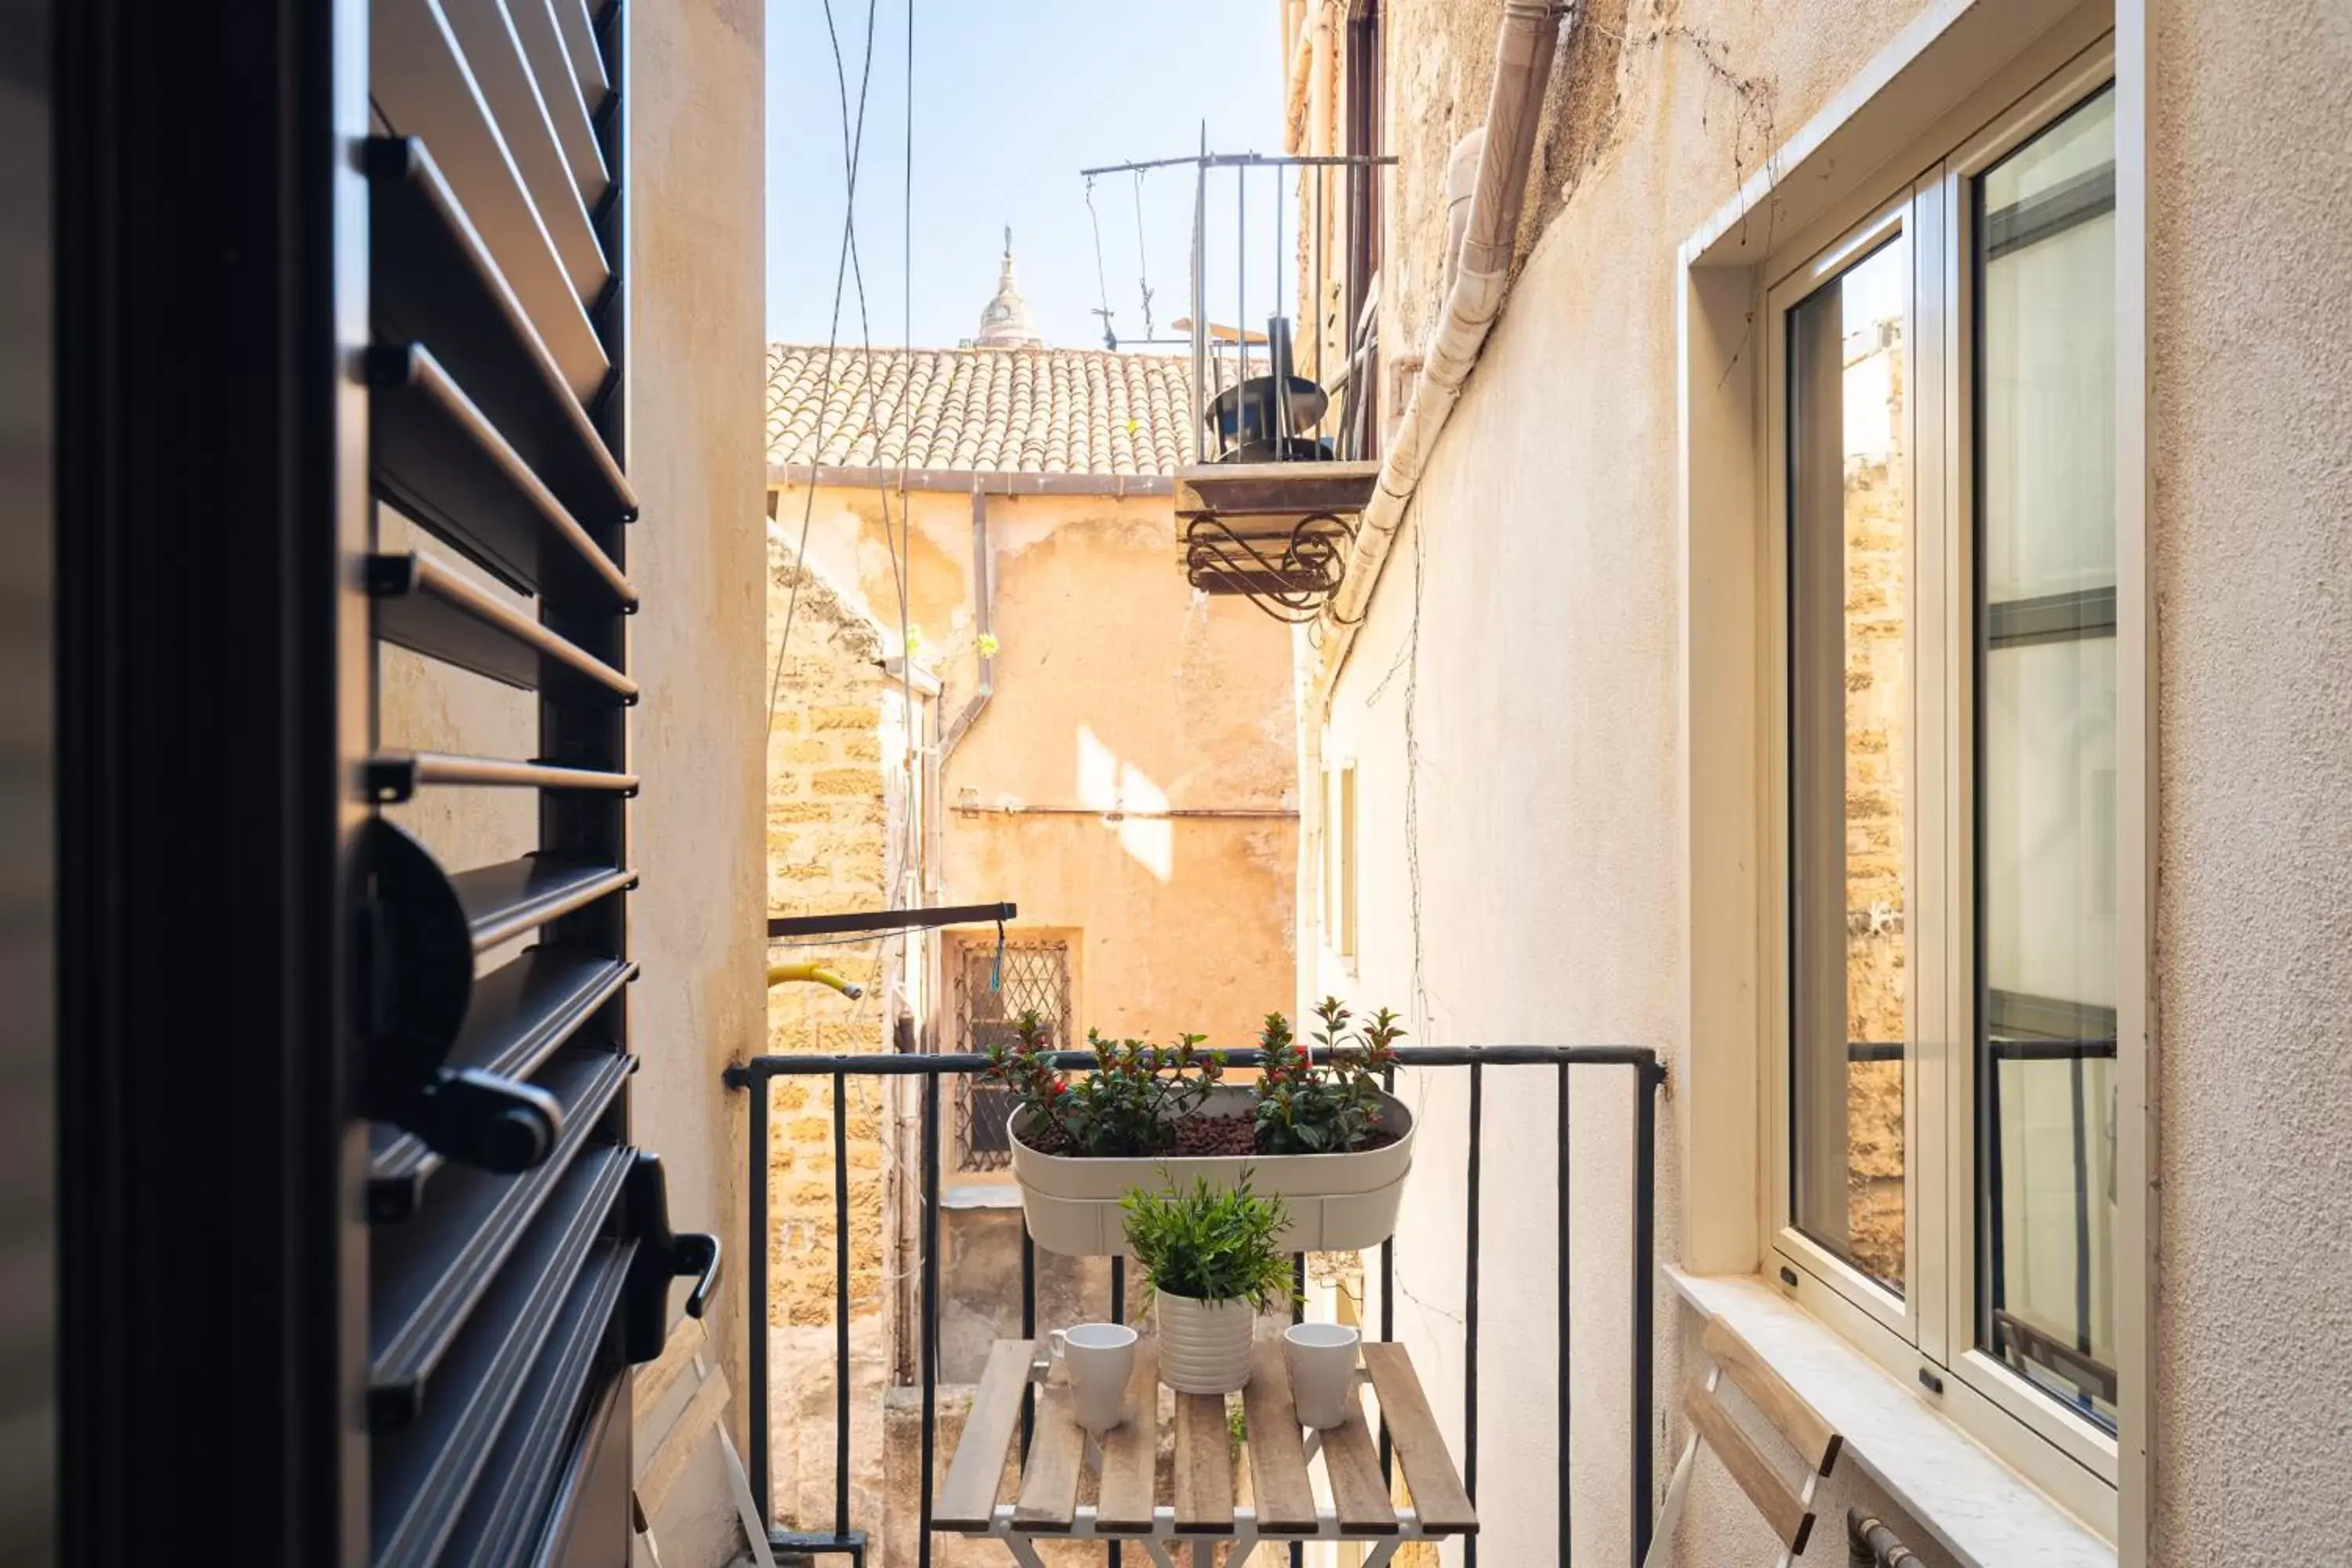 Balcony/Terrace in Open Sicily Homes - Residence ai Quattro Canti - Selfcheck-in